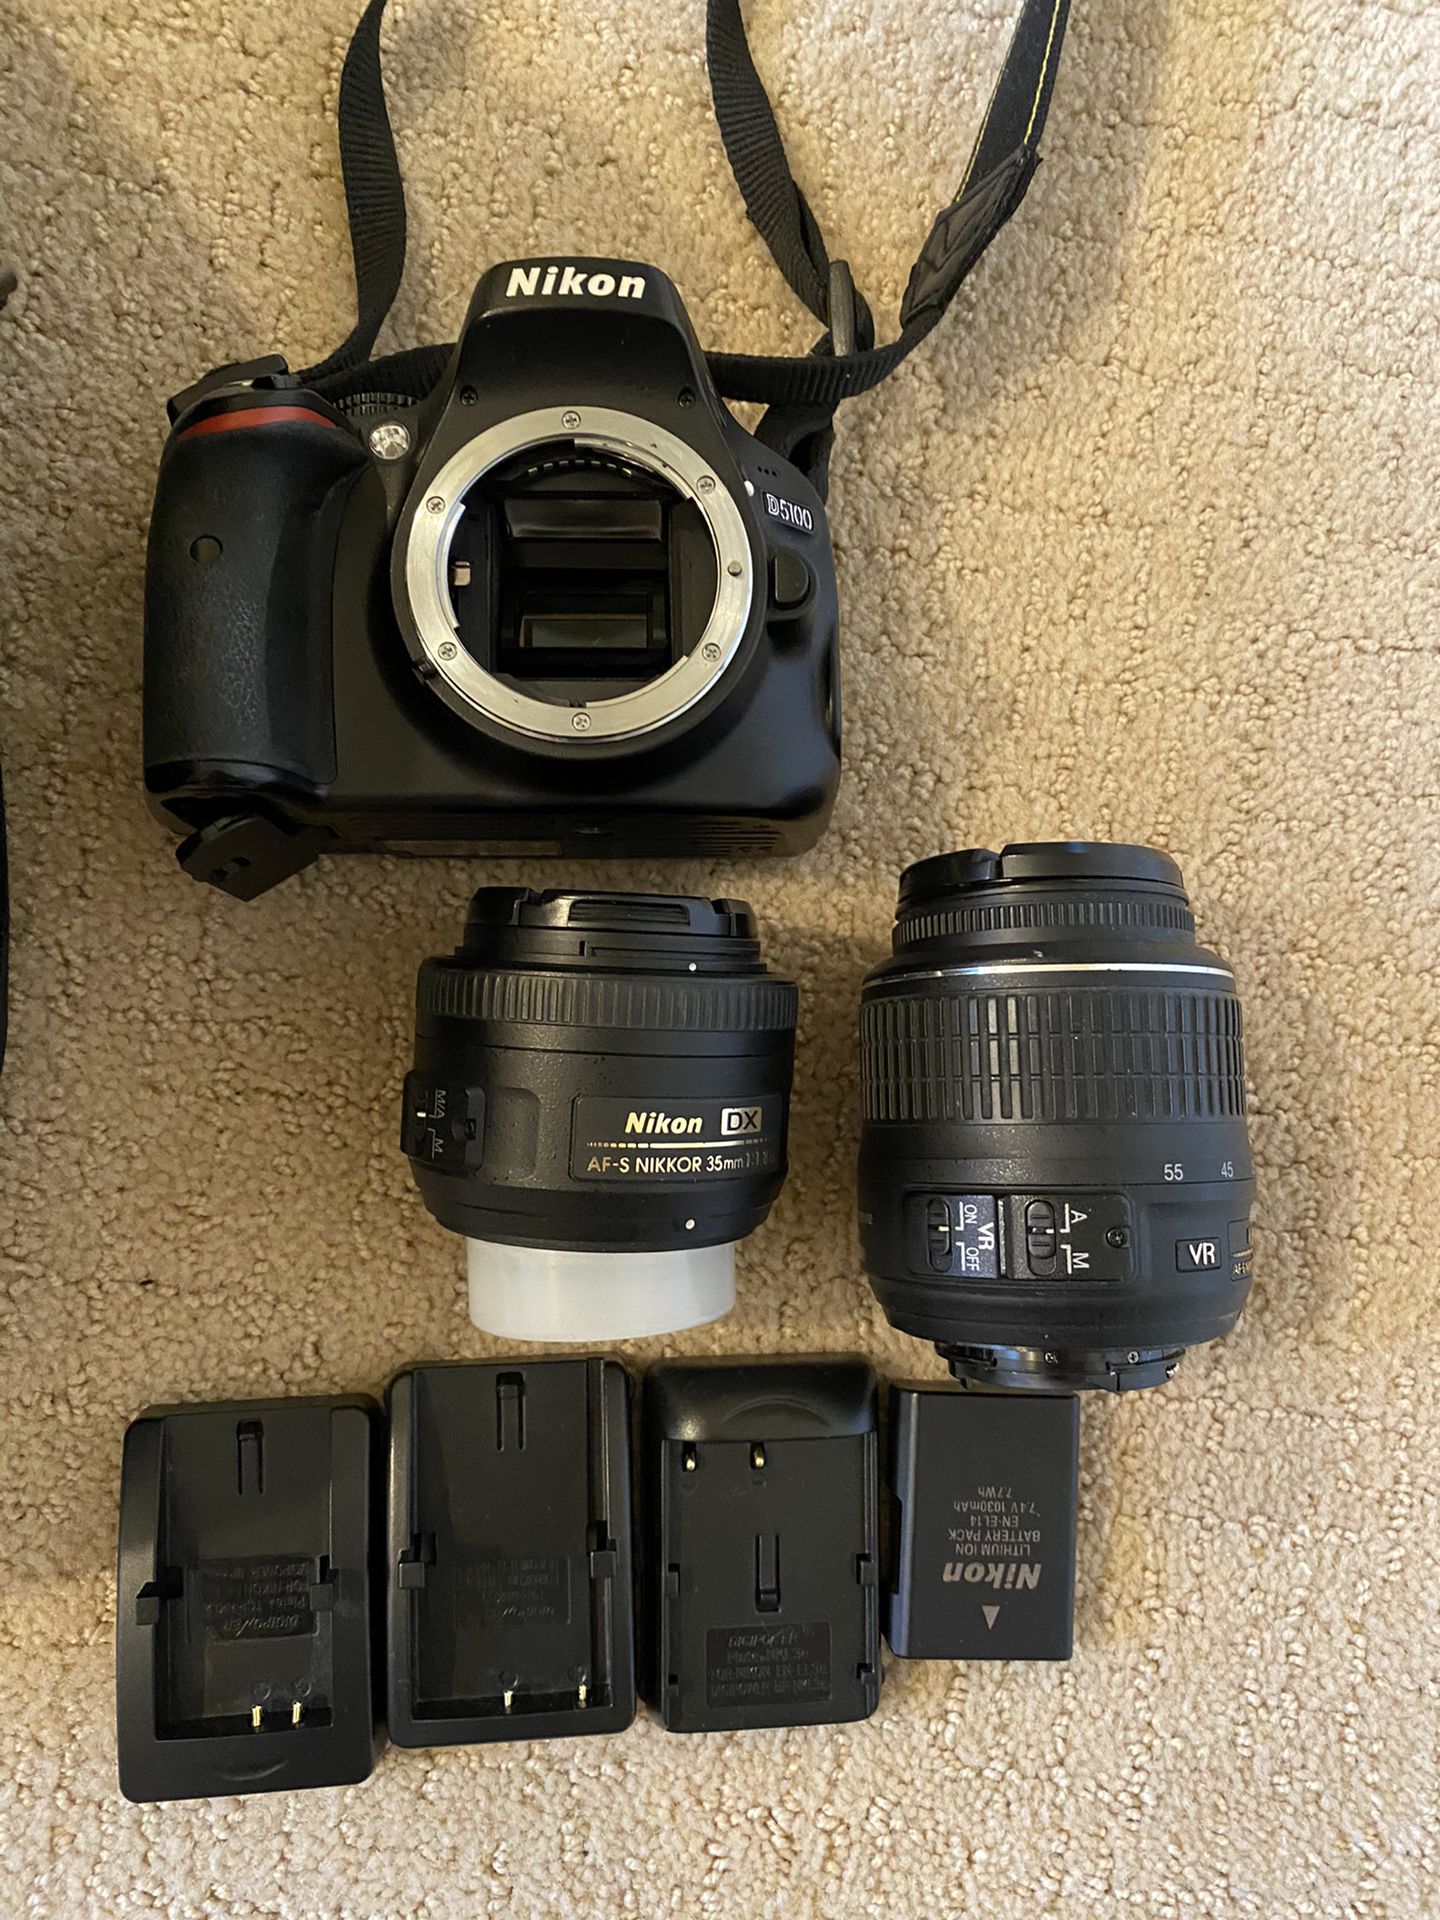 Nikon D5100 : 2 Lenses And Carrying Case